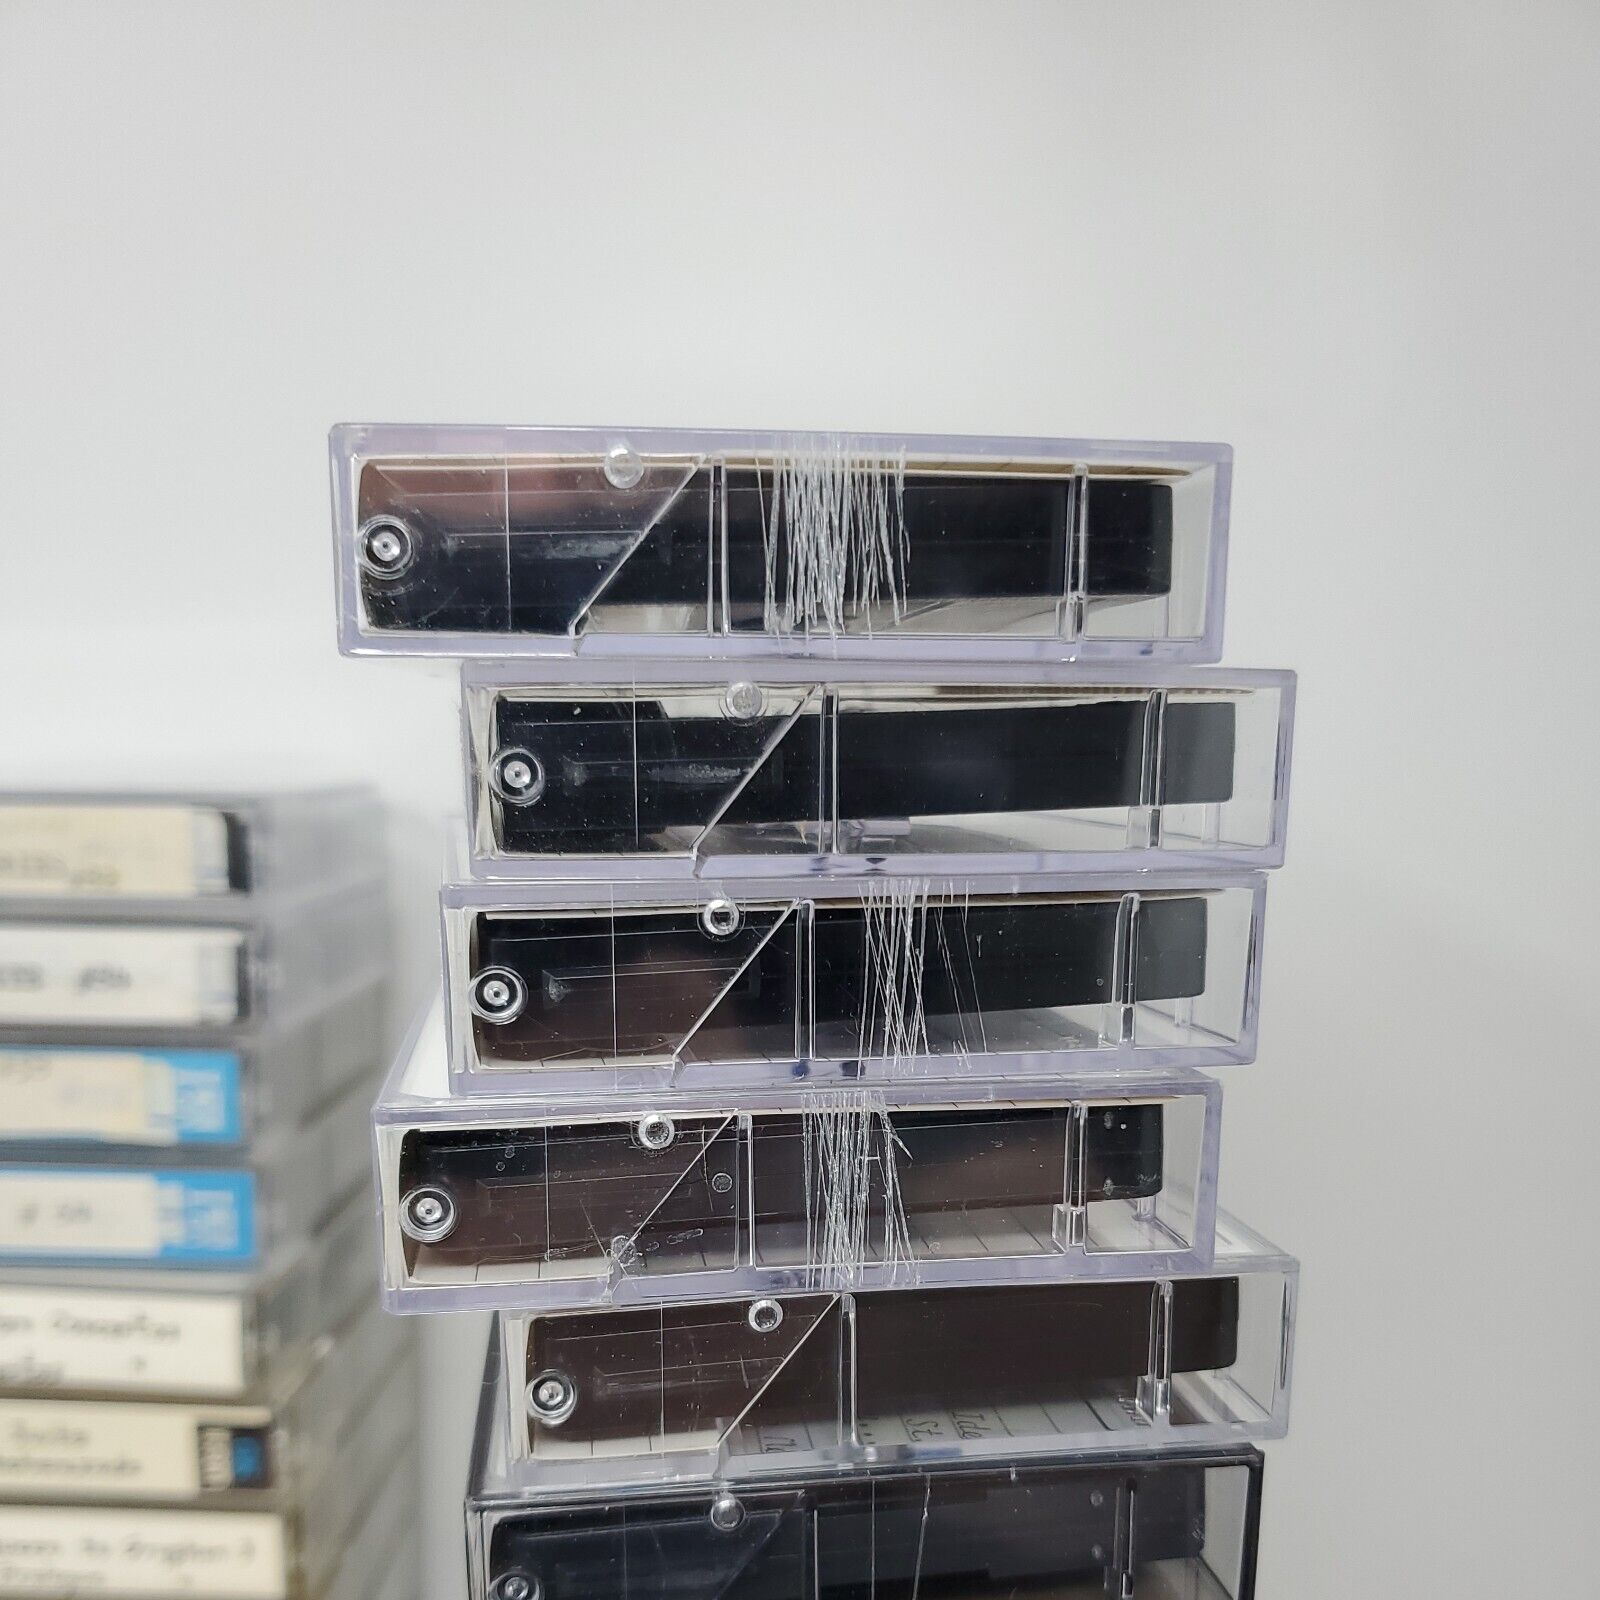 Cassette Lot of 100 with Cases (Recorded On, Maxell XL II, C90, TDK, Sony, Used) Без бренда - фотография #11